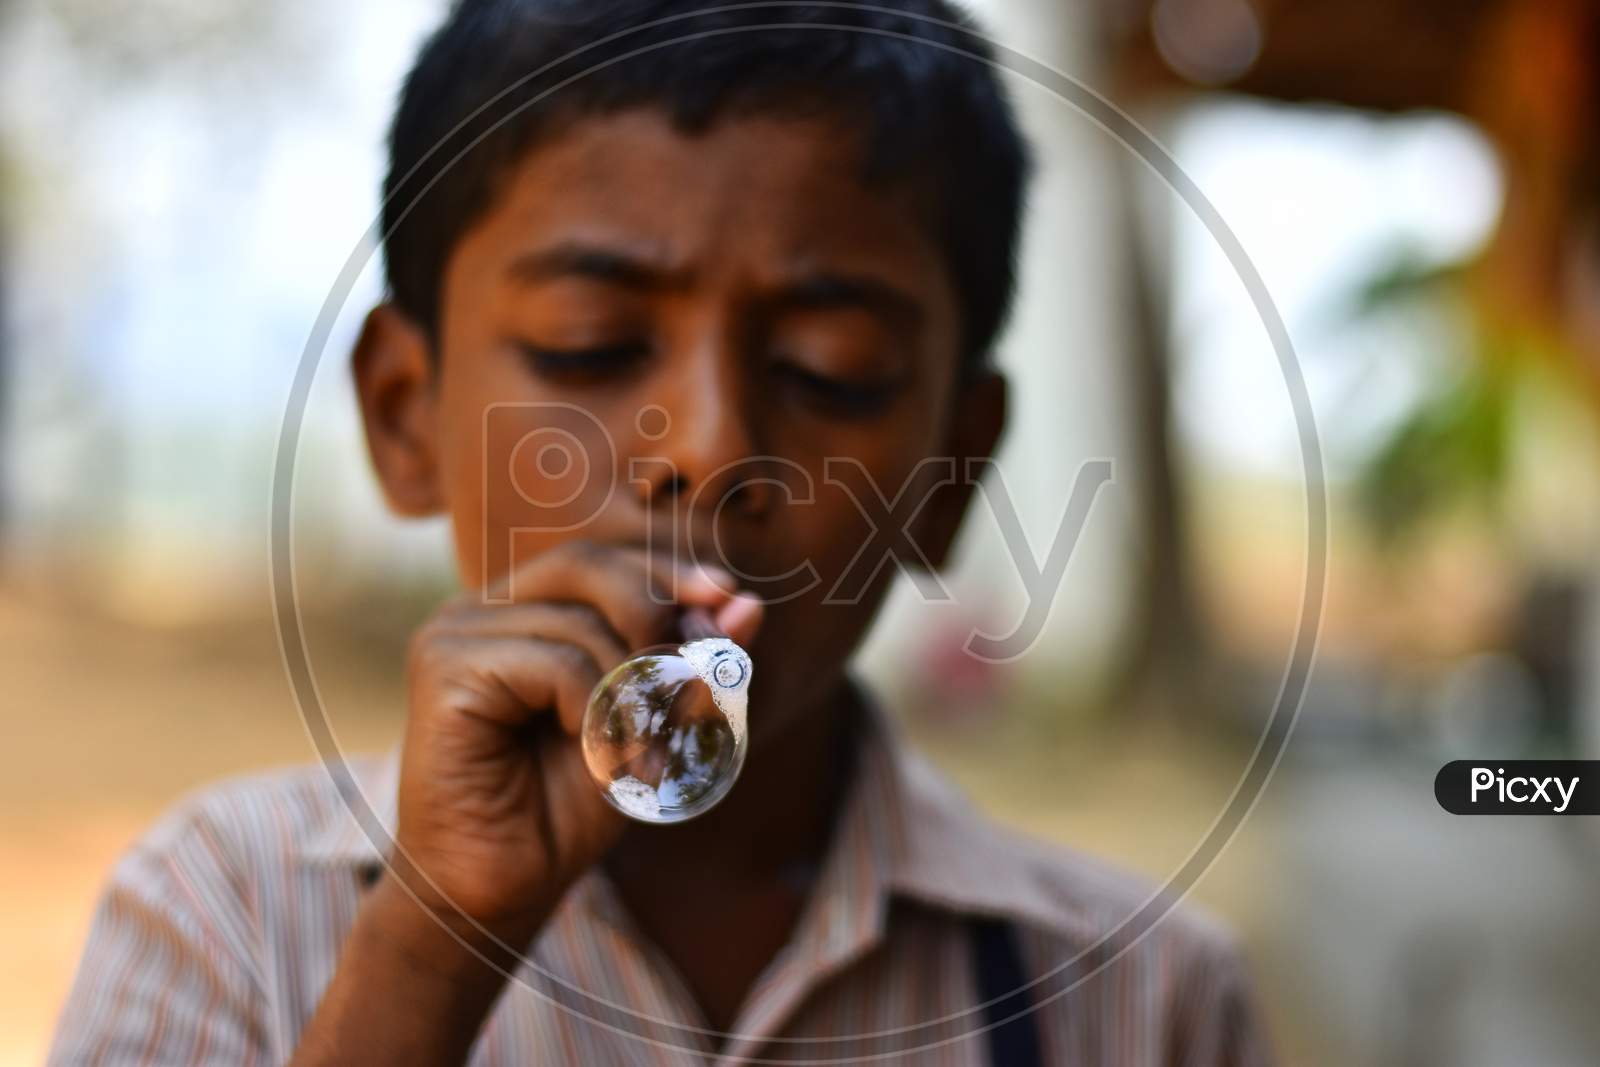 A kid blowing water bubbles.